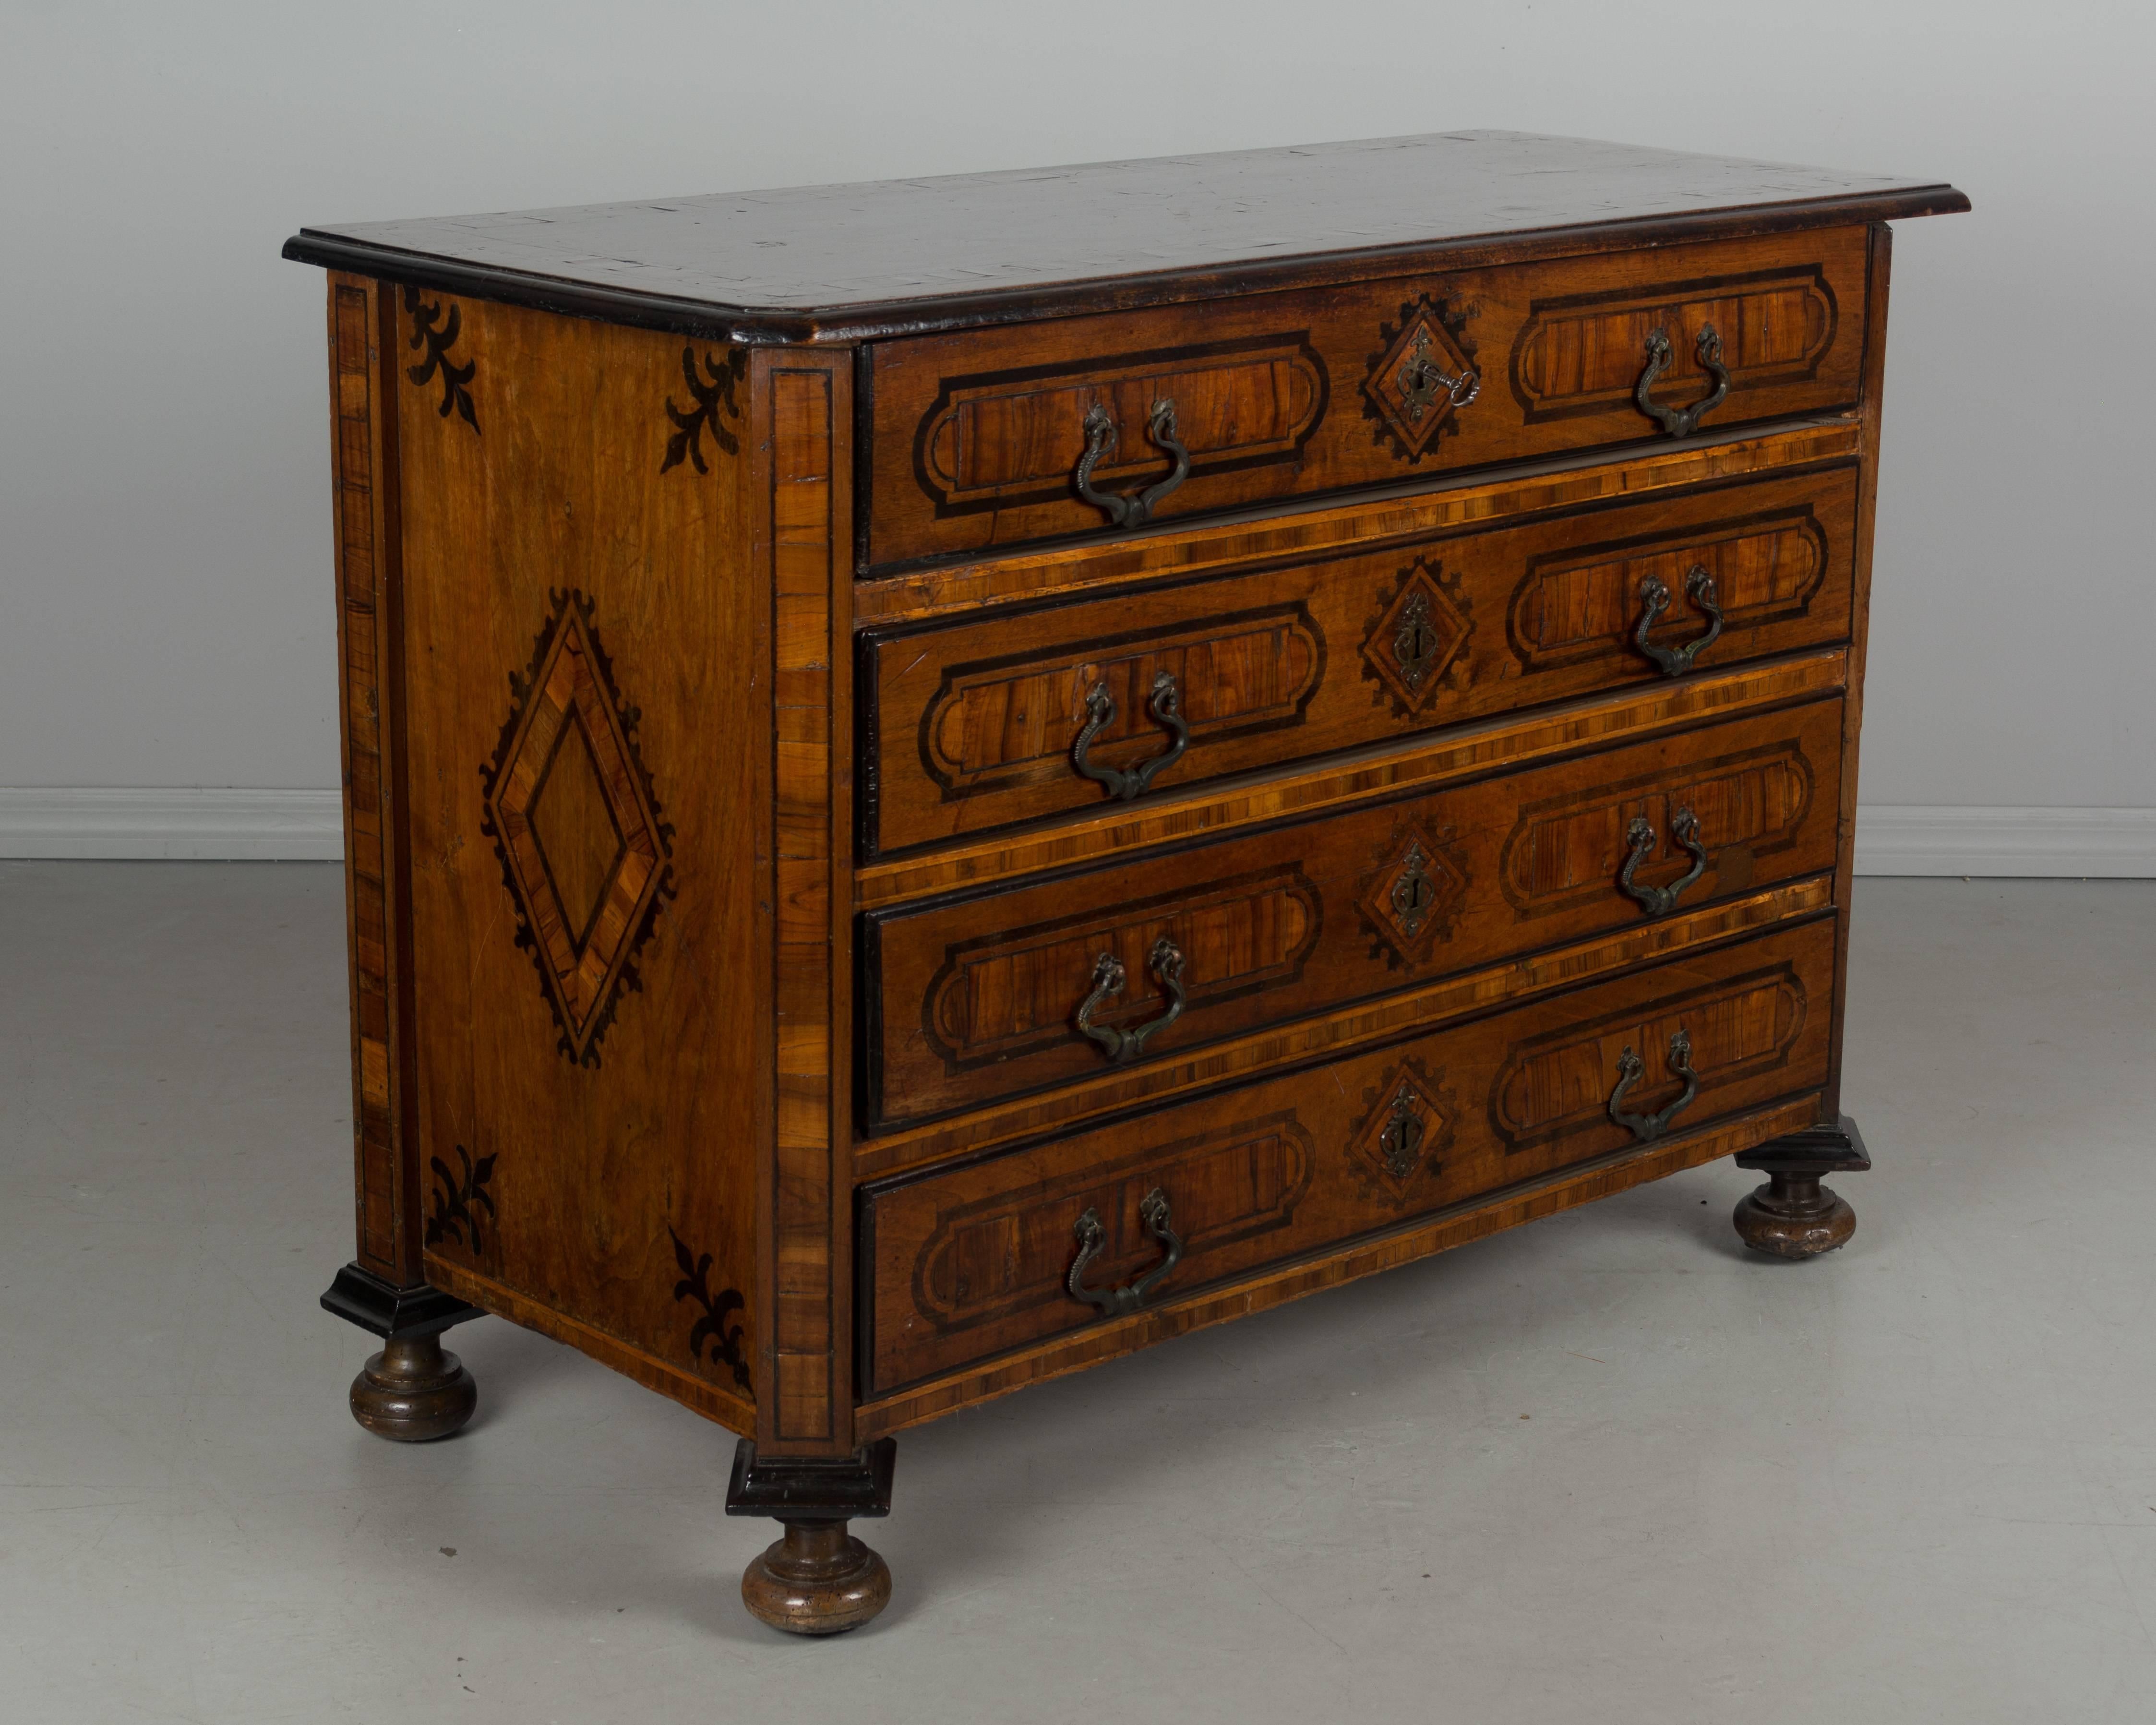 18th century Italian marquetry commode with three drawers and a top drawer that pulls out to reveal a desk. Exceptional craftsmanship for this Piedmont (Northern Italy) chest, made of solid walnut, with walnut veneer and various ebonized wood